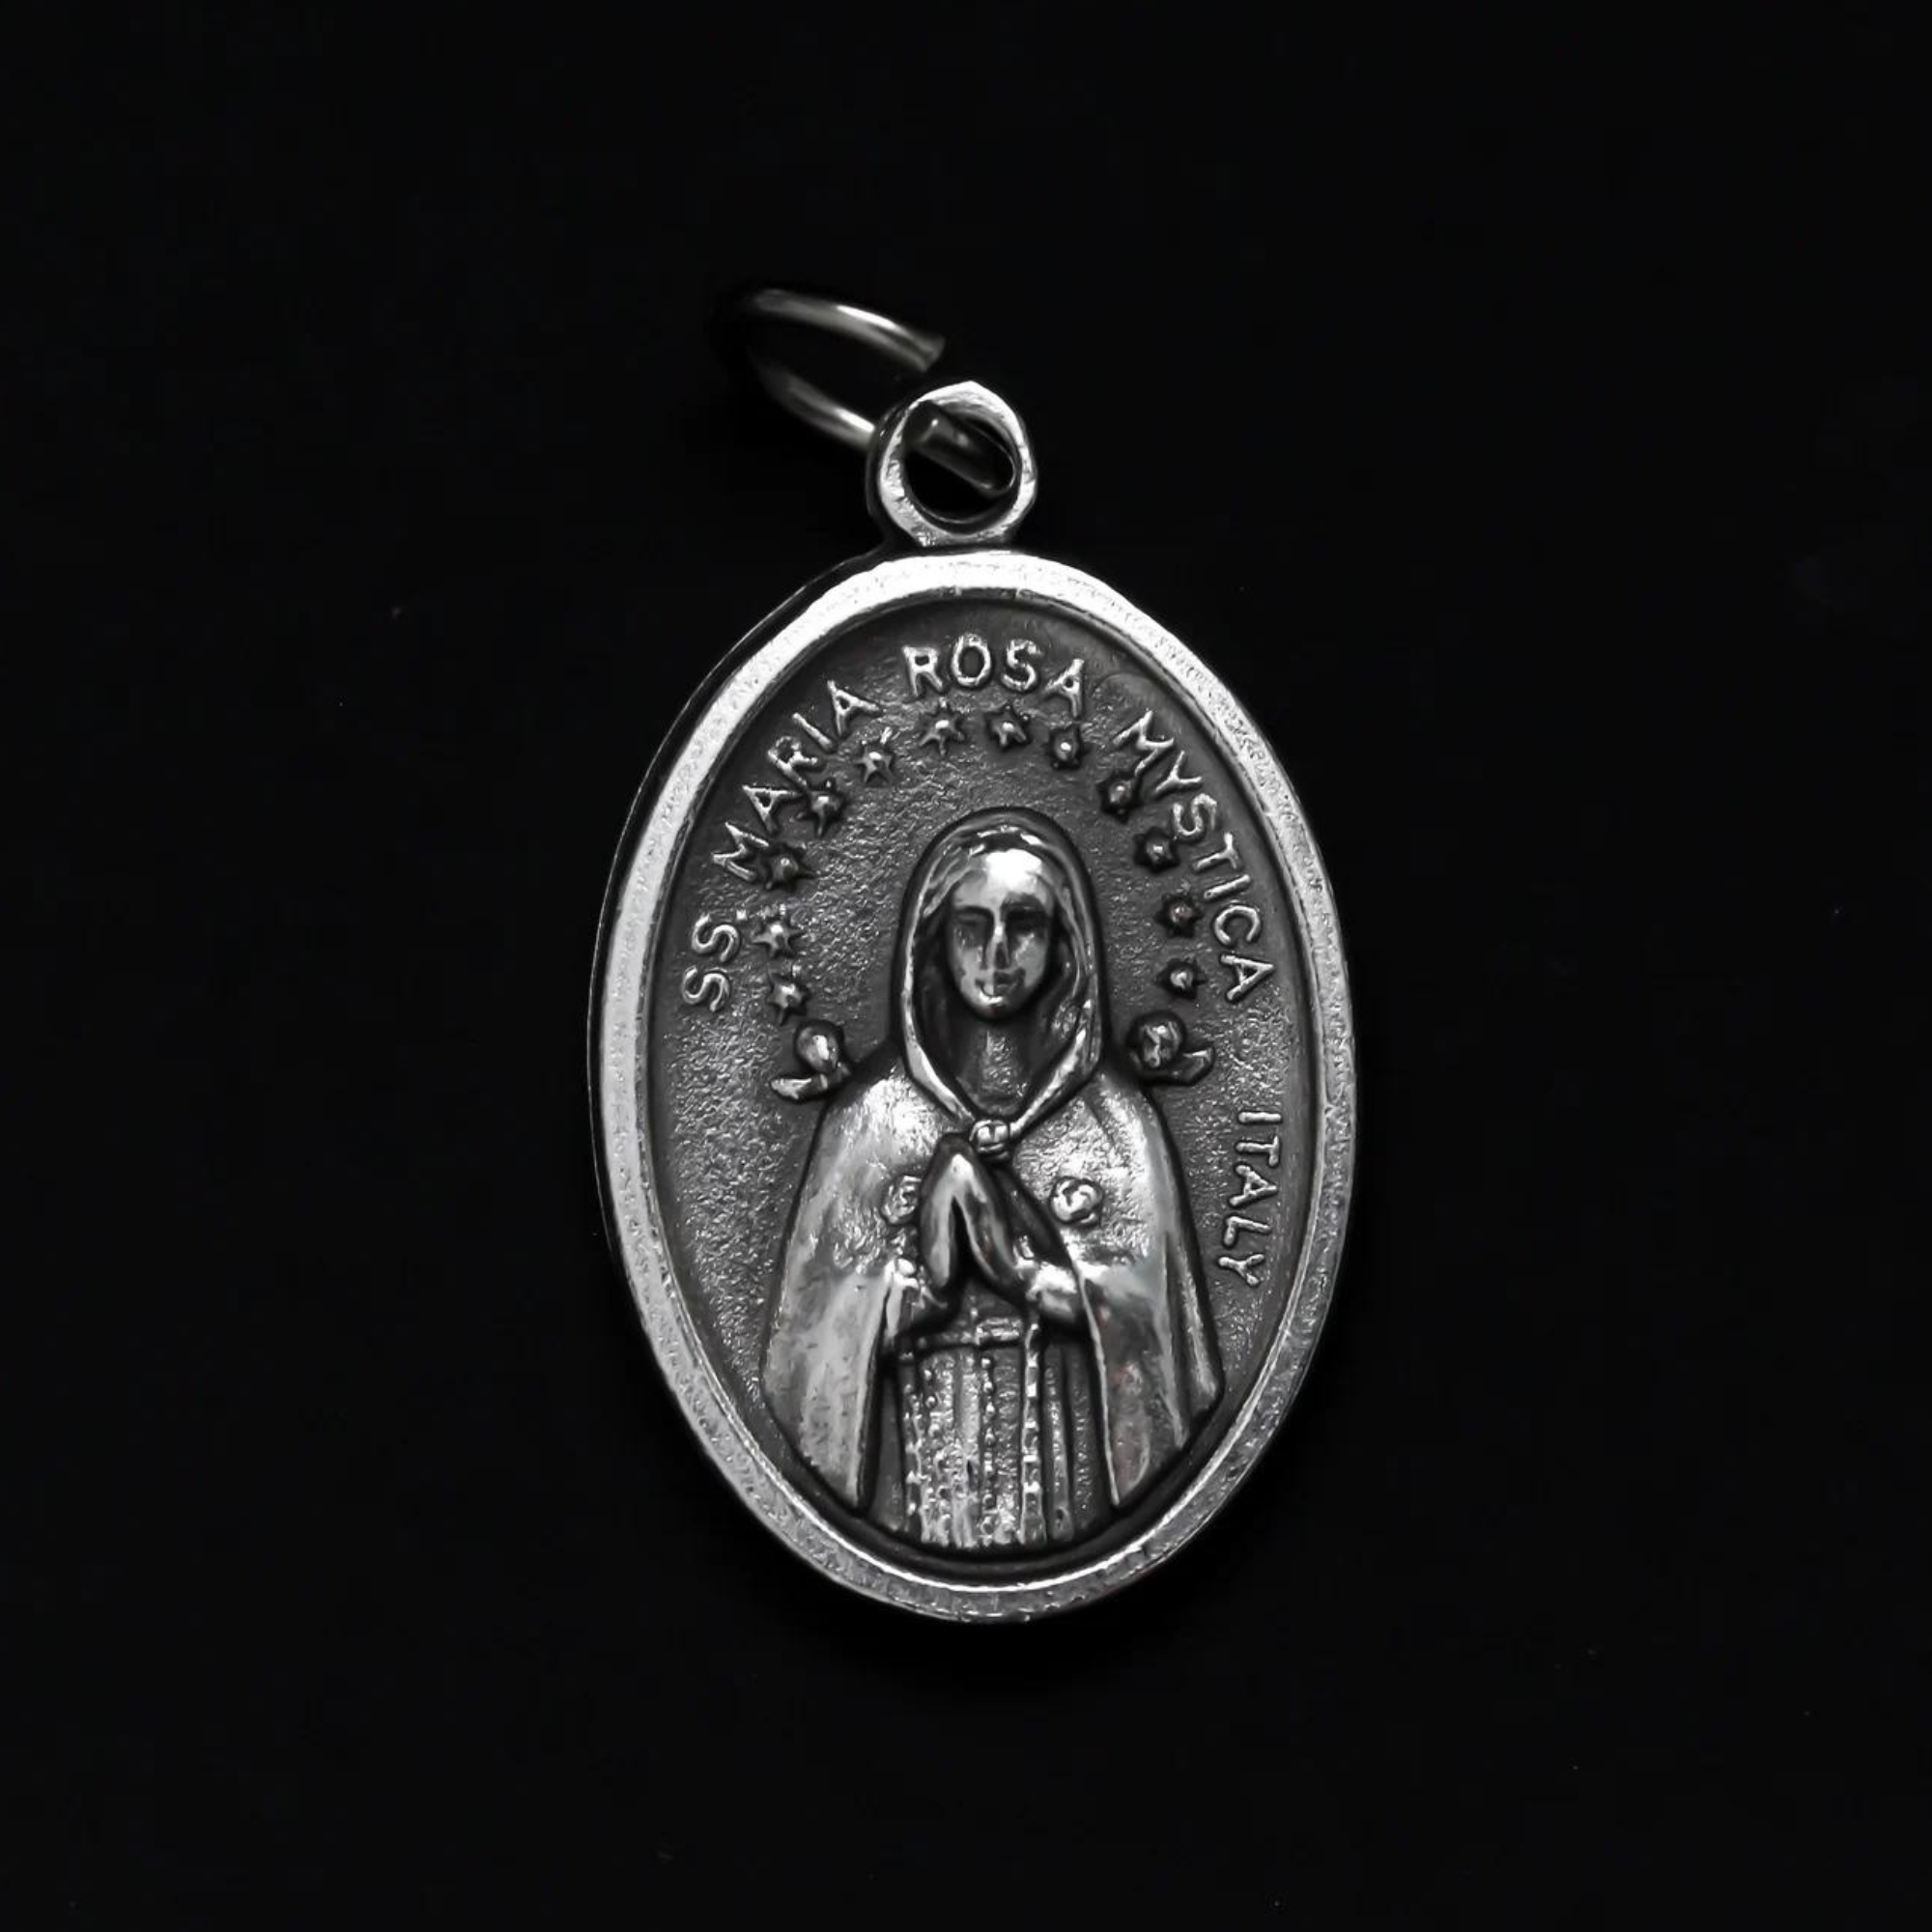 Maria Rosa Mystica medal that is marked "Pray for us" on the backside